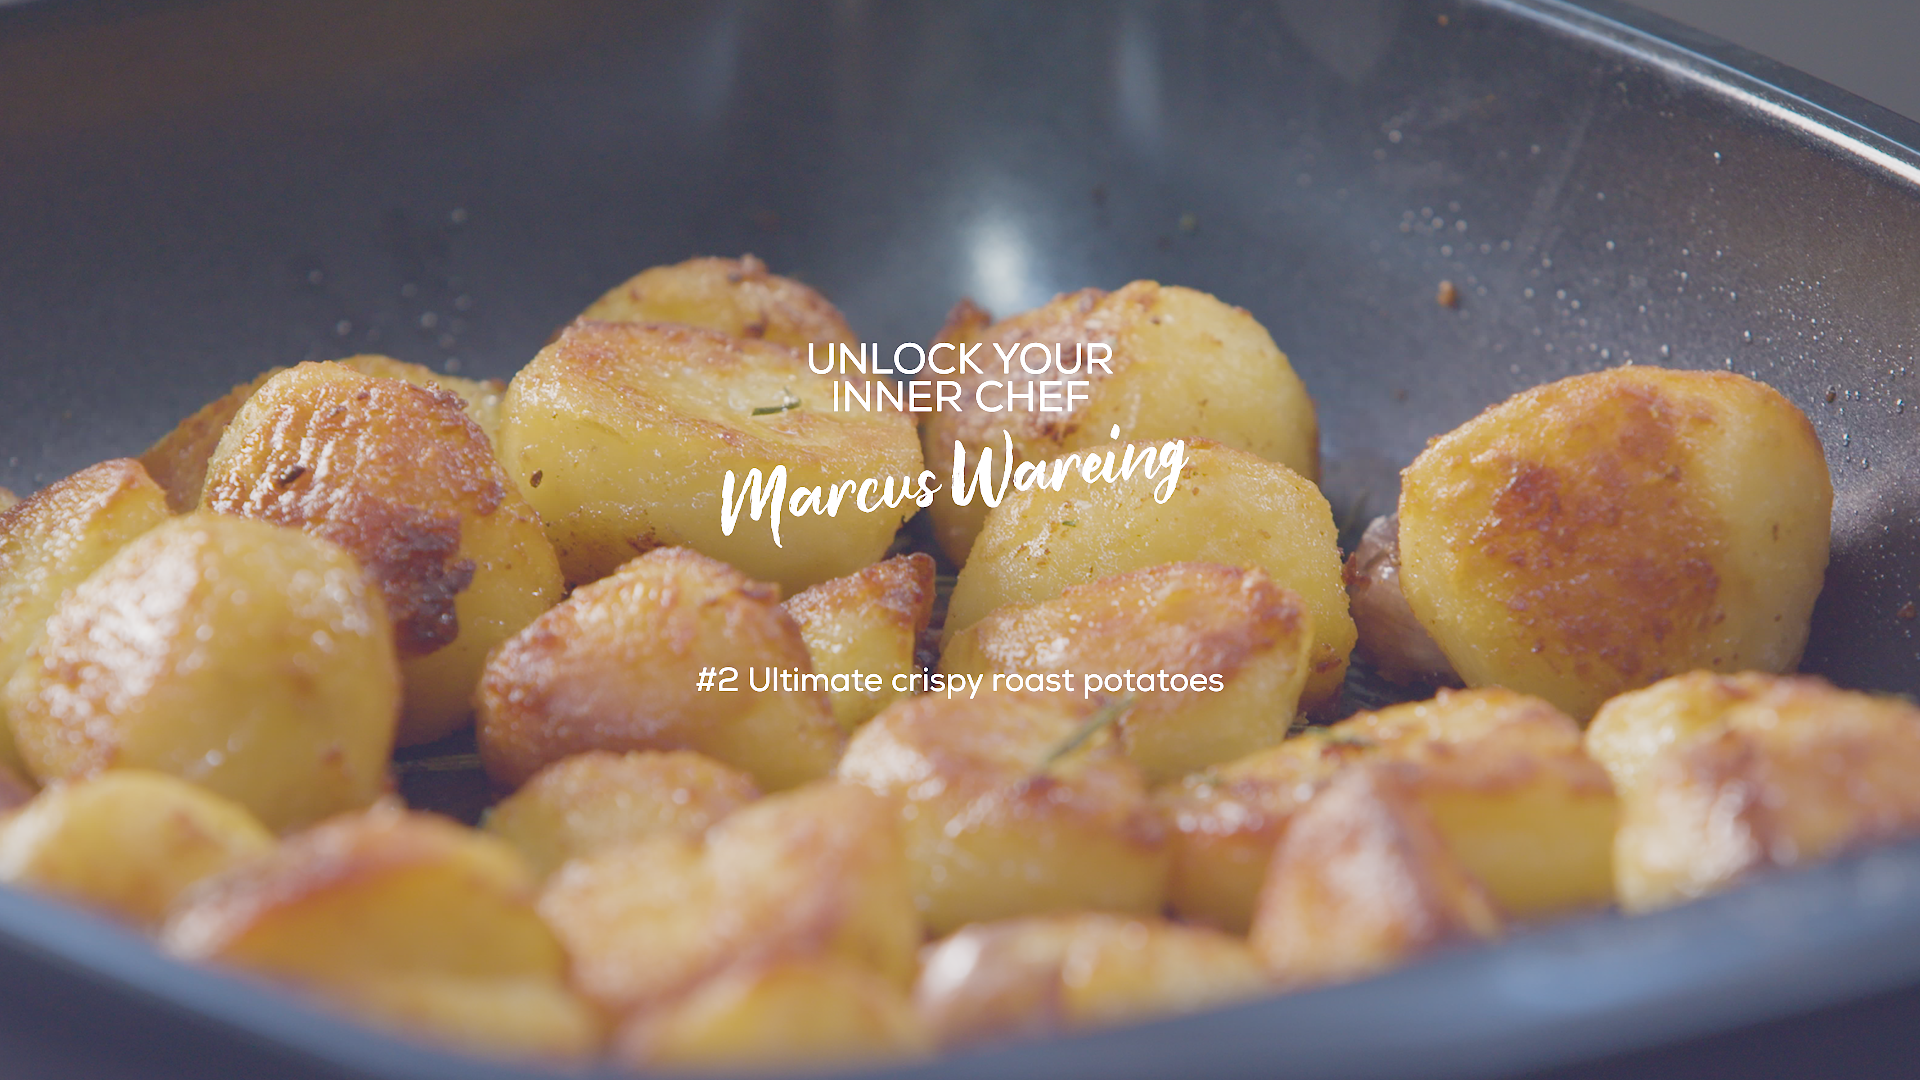 Unlock your inner chef with Marcus Wareing: #3 Ultimate crispy roast potatoes